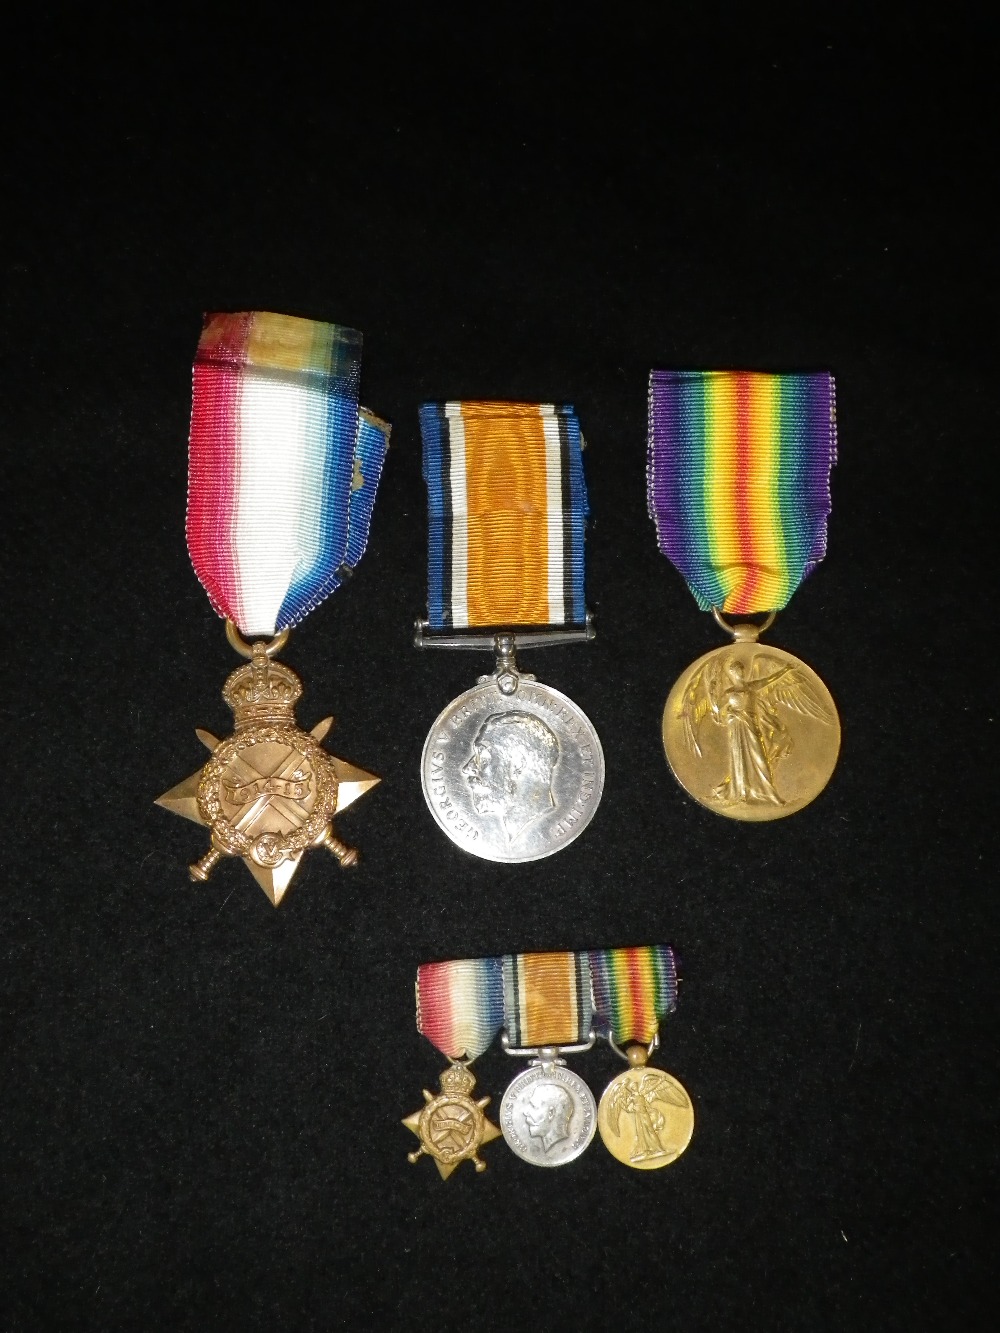 A First World War Trio, awarded to Gunner M.J. Franklin R.F.A. and miniatures